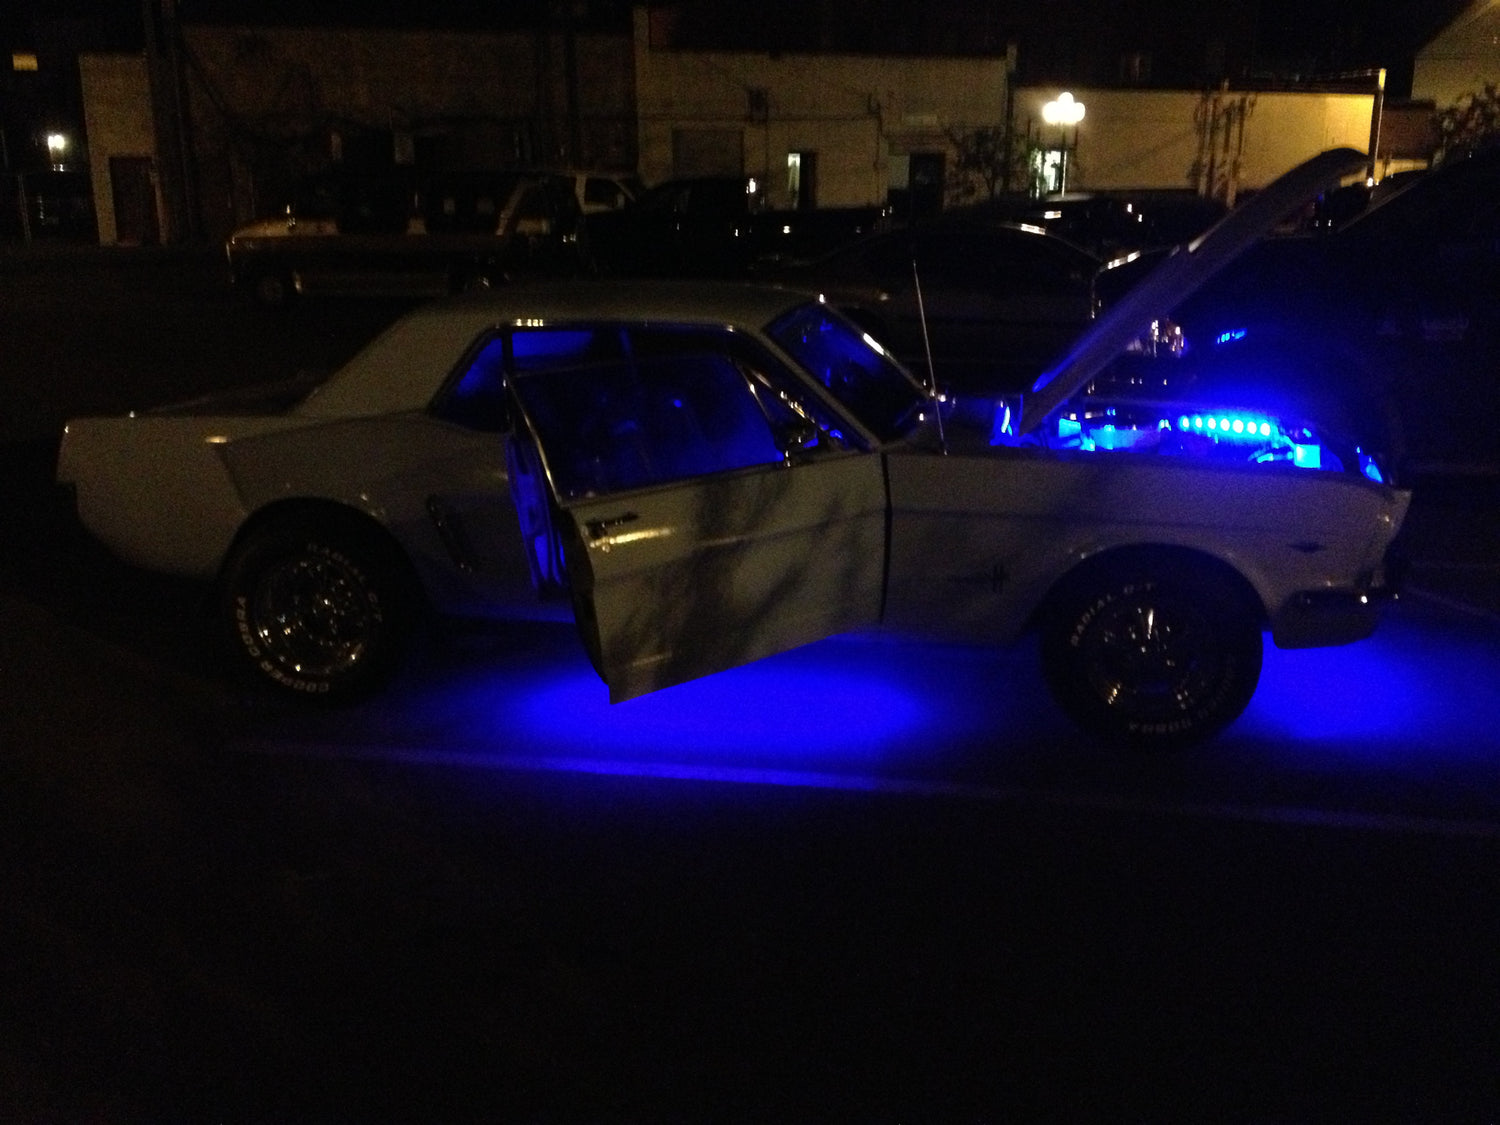 1965 Ford Mustang with LEDs and underglow installed.